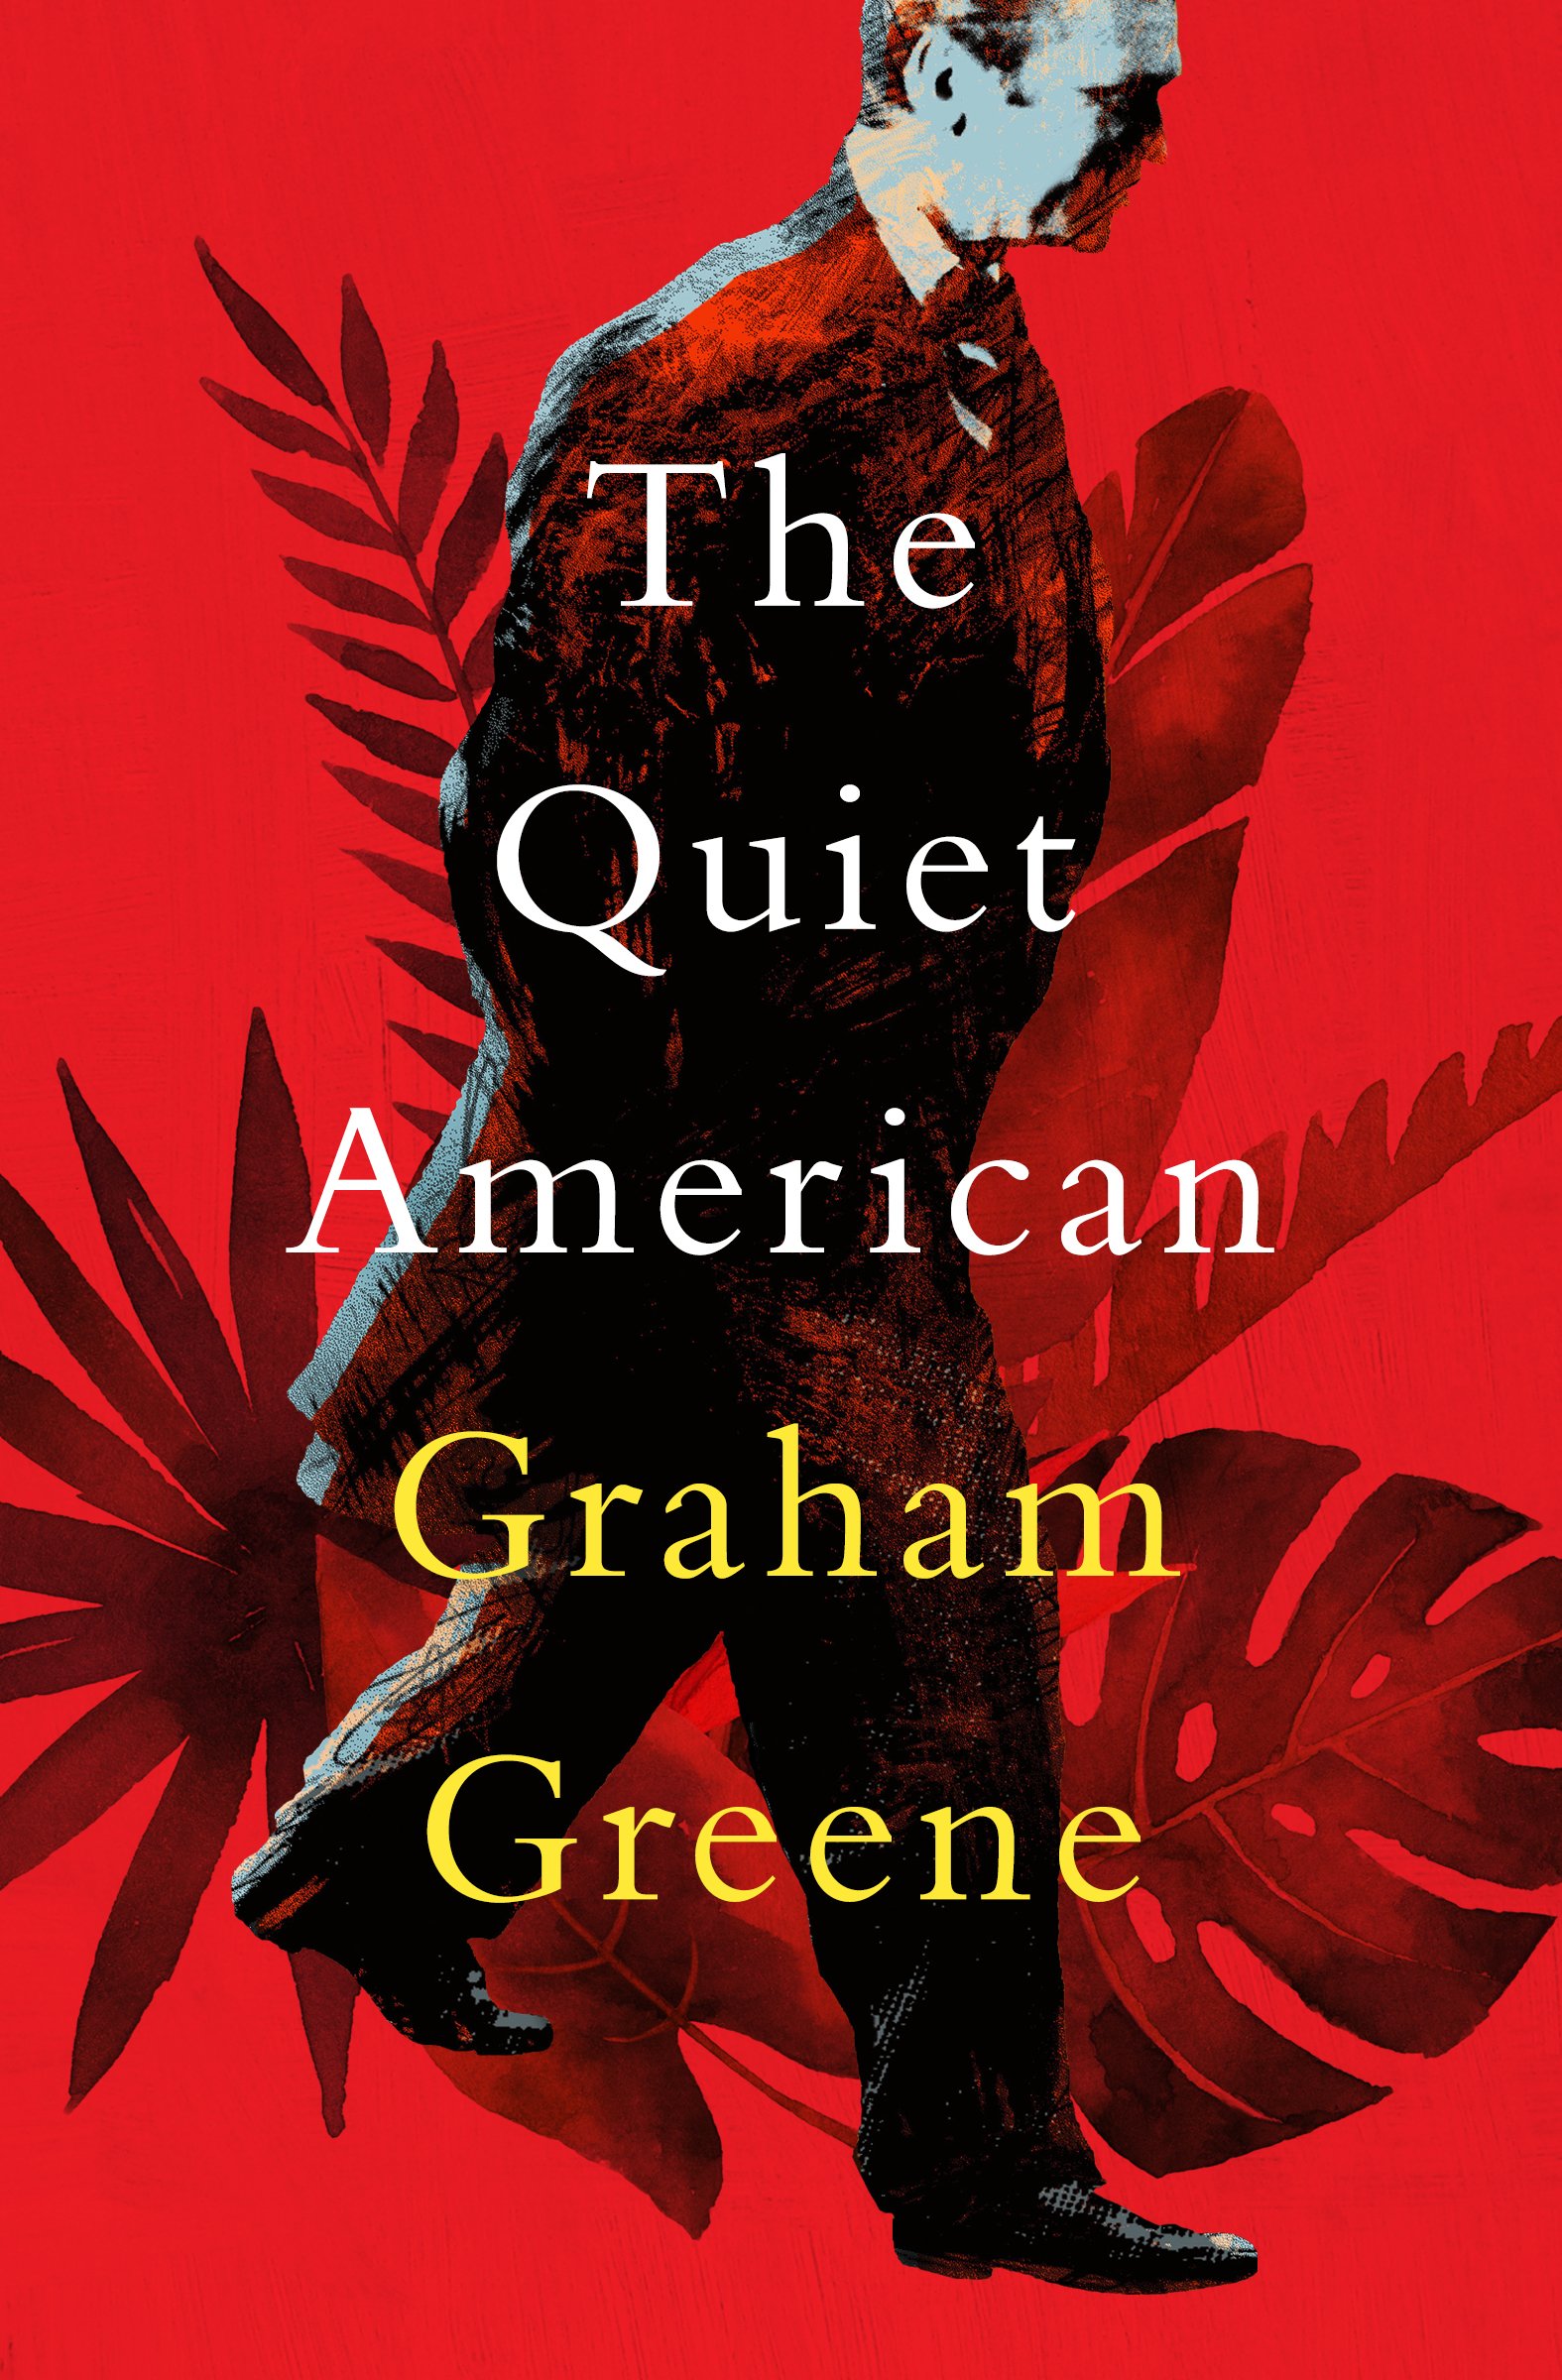 The Quiet American (eBook) by Graham Greene $1.99